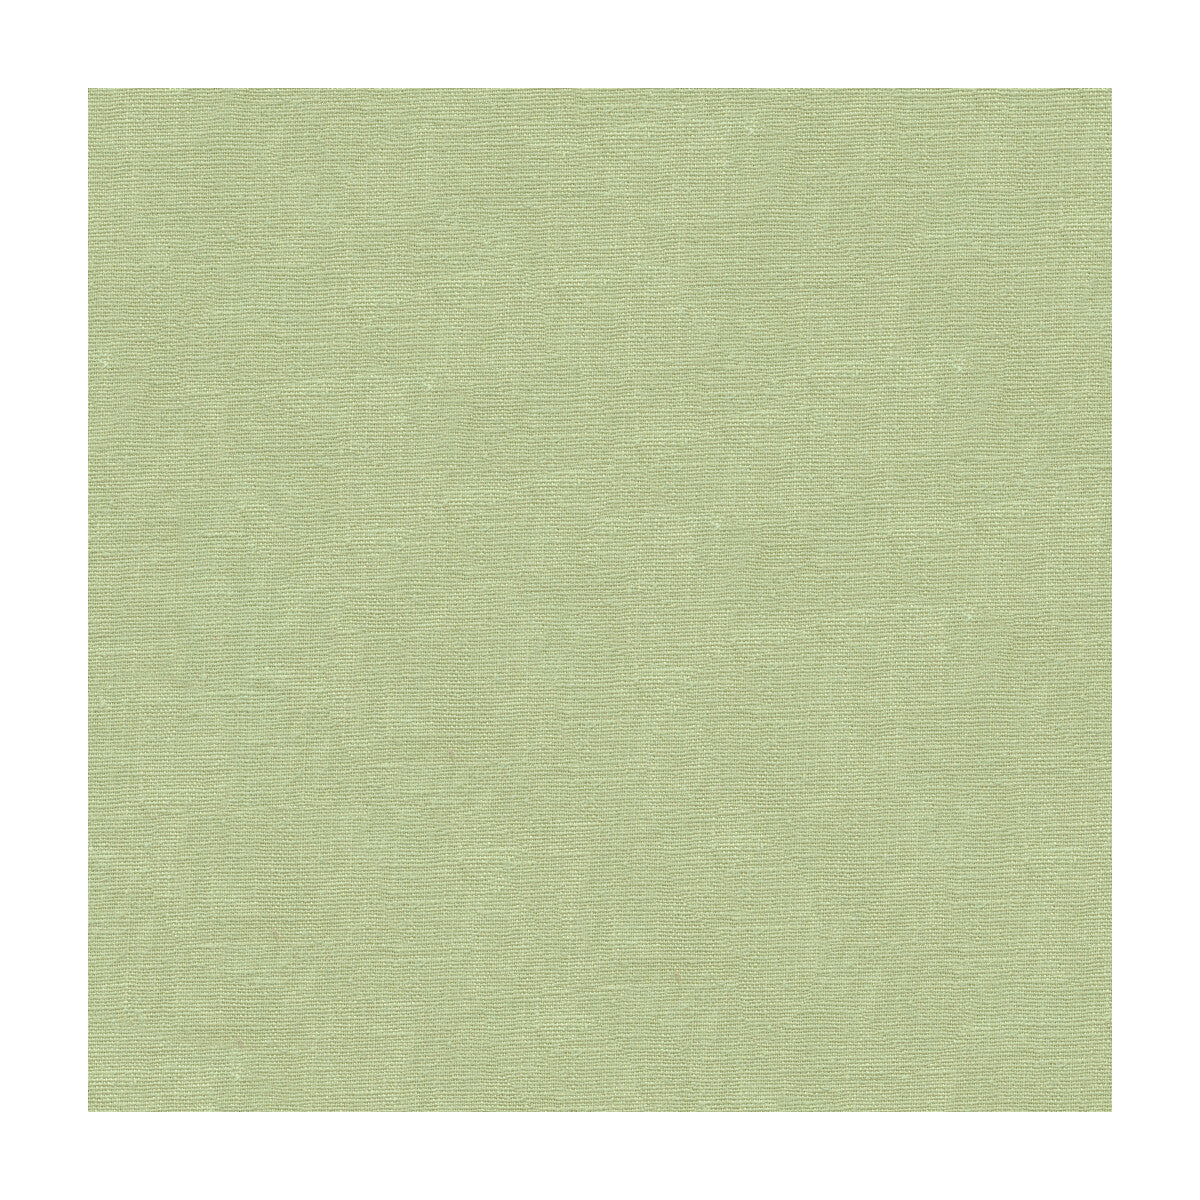 Dublin Linen fabric in jade color - pattern 2012175.130.0 - by Lee Jofa in the Colour Complements II collection